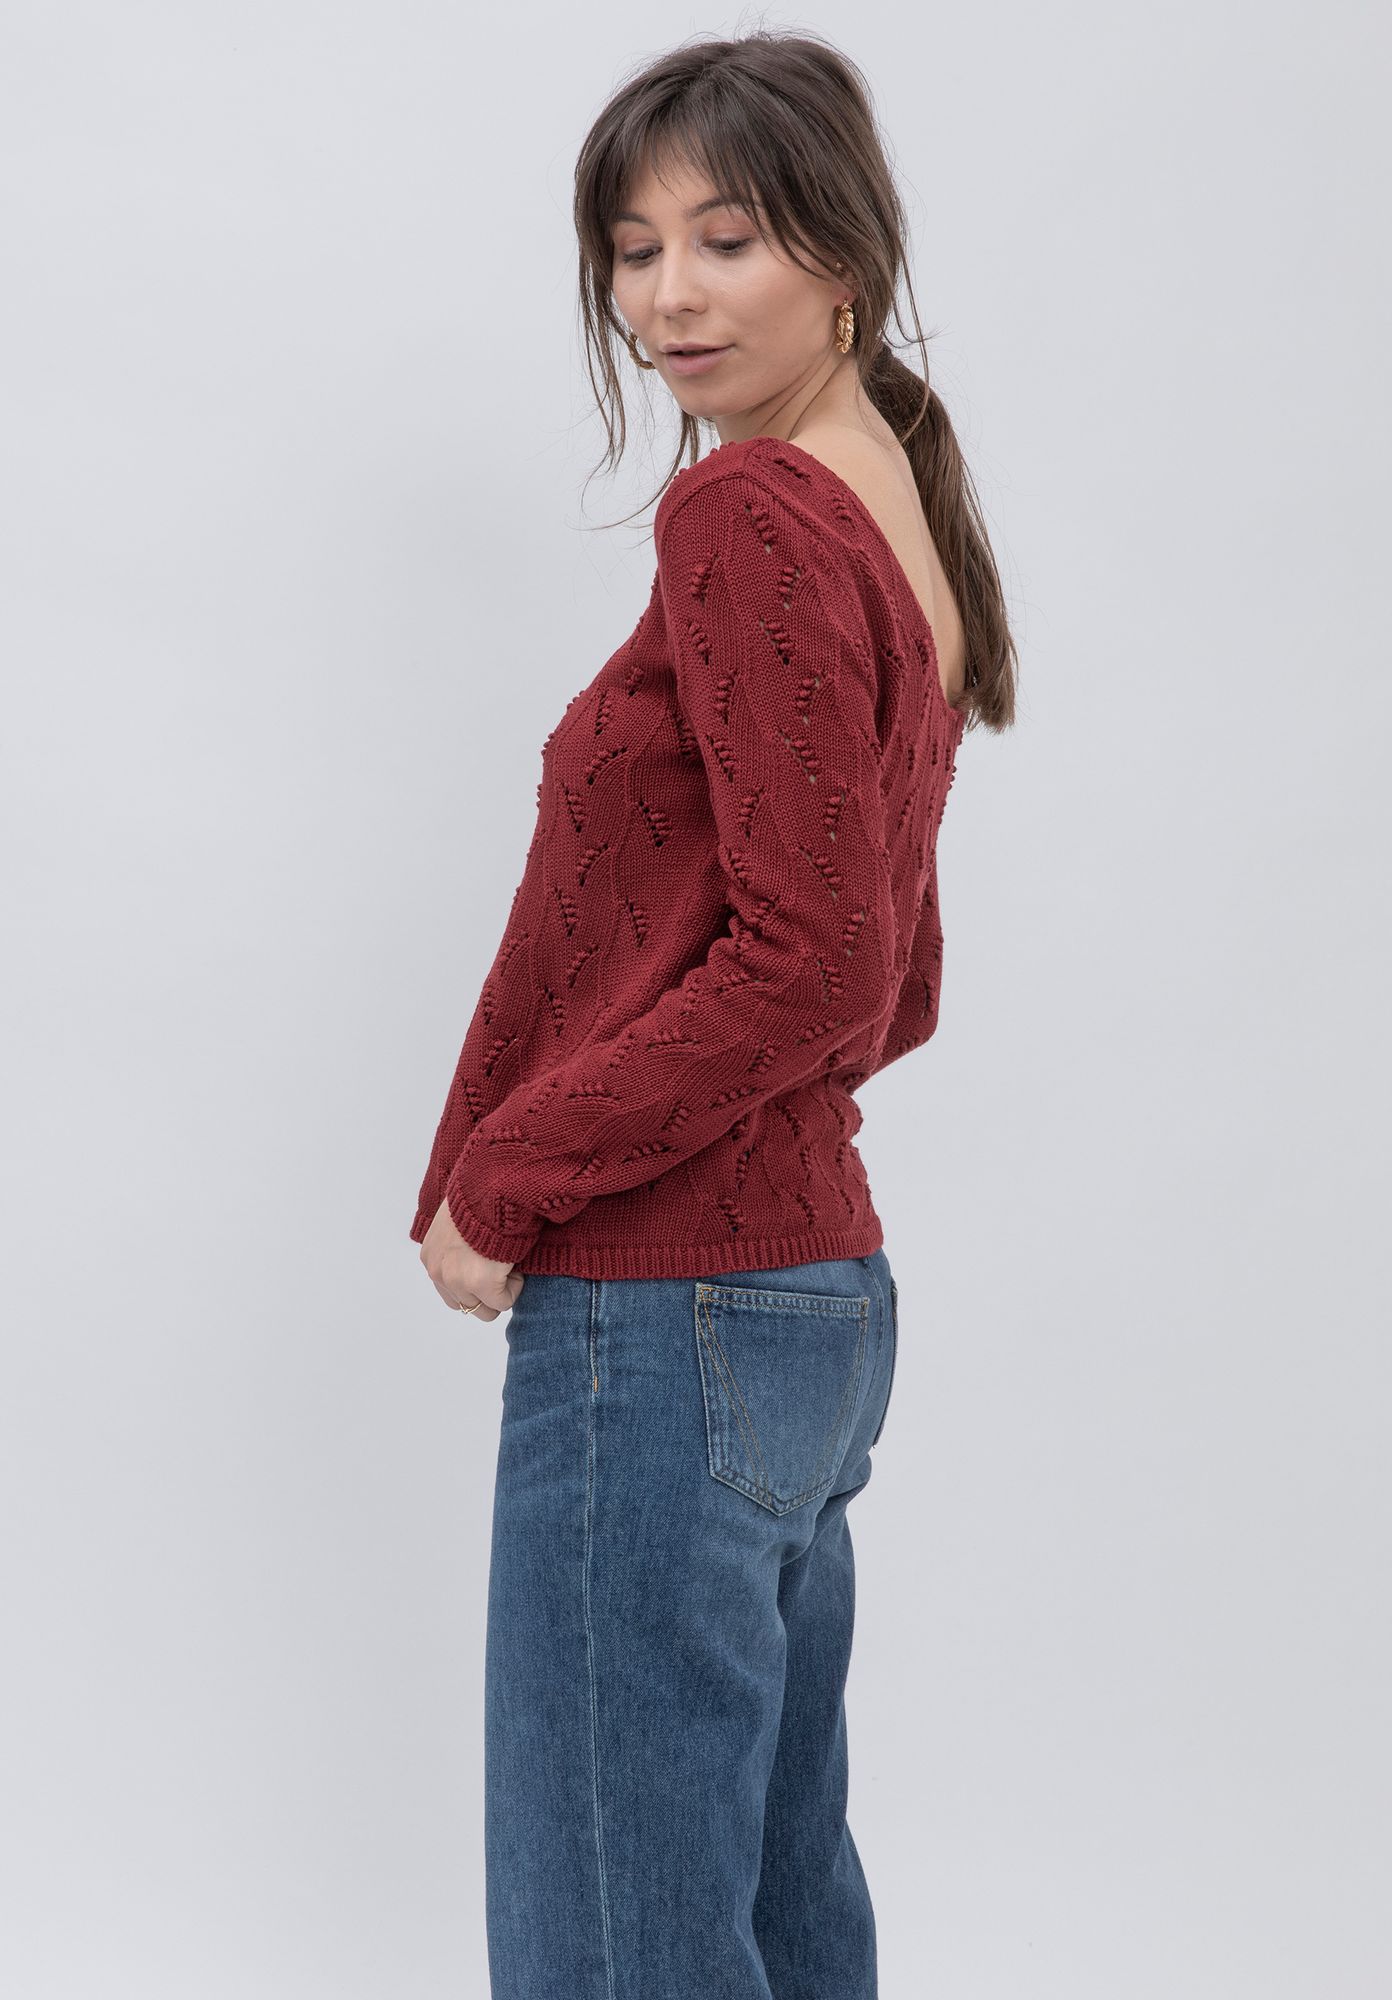 Knitted sweater IDENOR in wine red by LOVJOI made of organic cotton (ST)